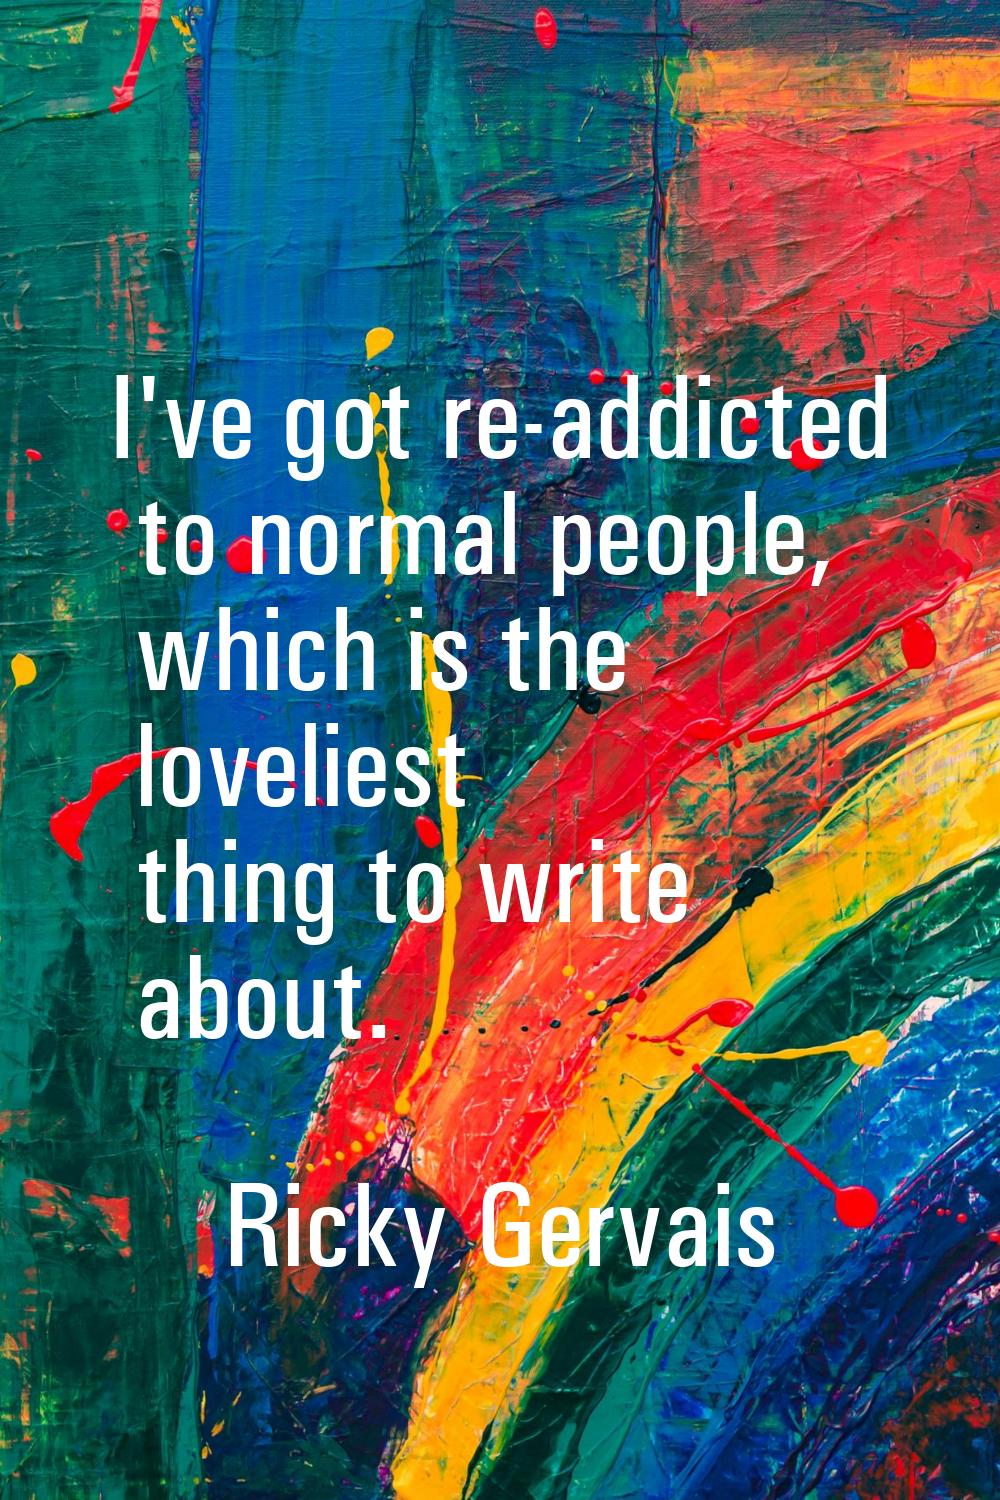 I've got re-addicted to normal people, which is the loveliest thing to write about.